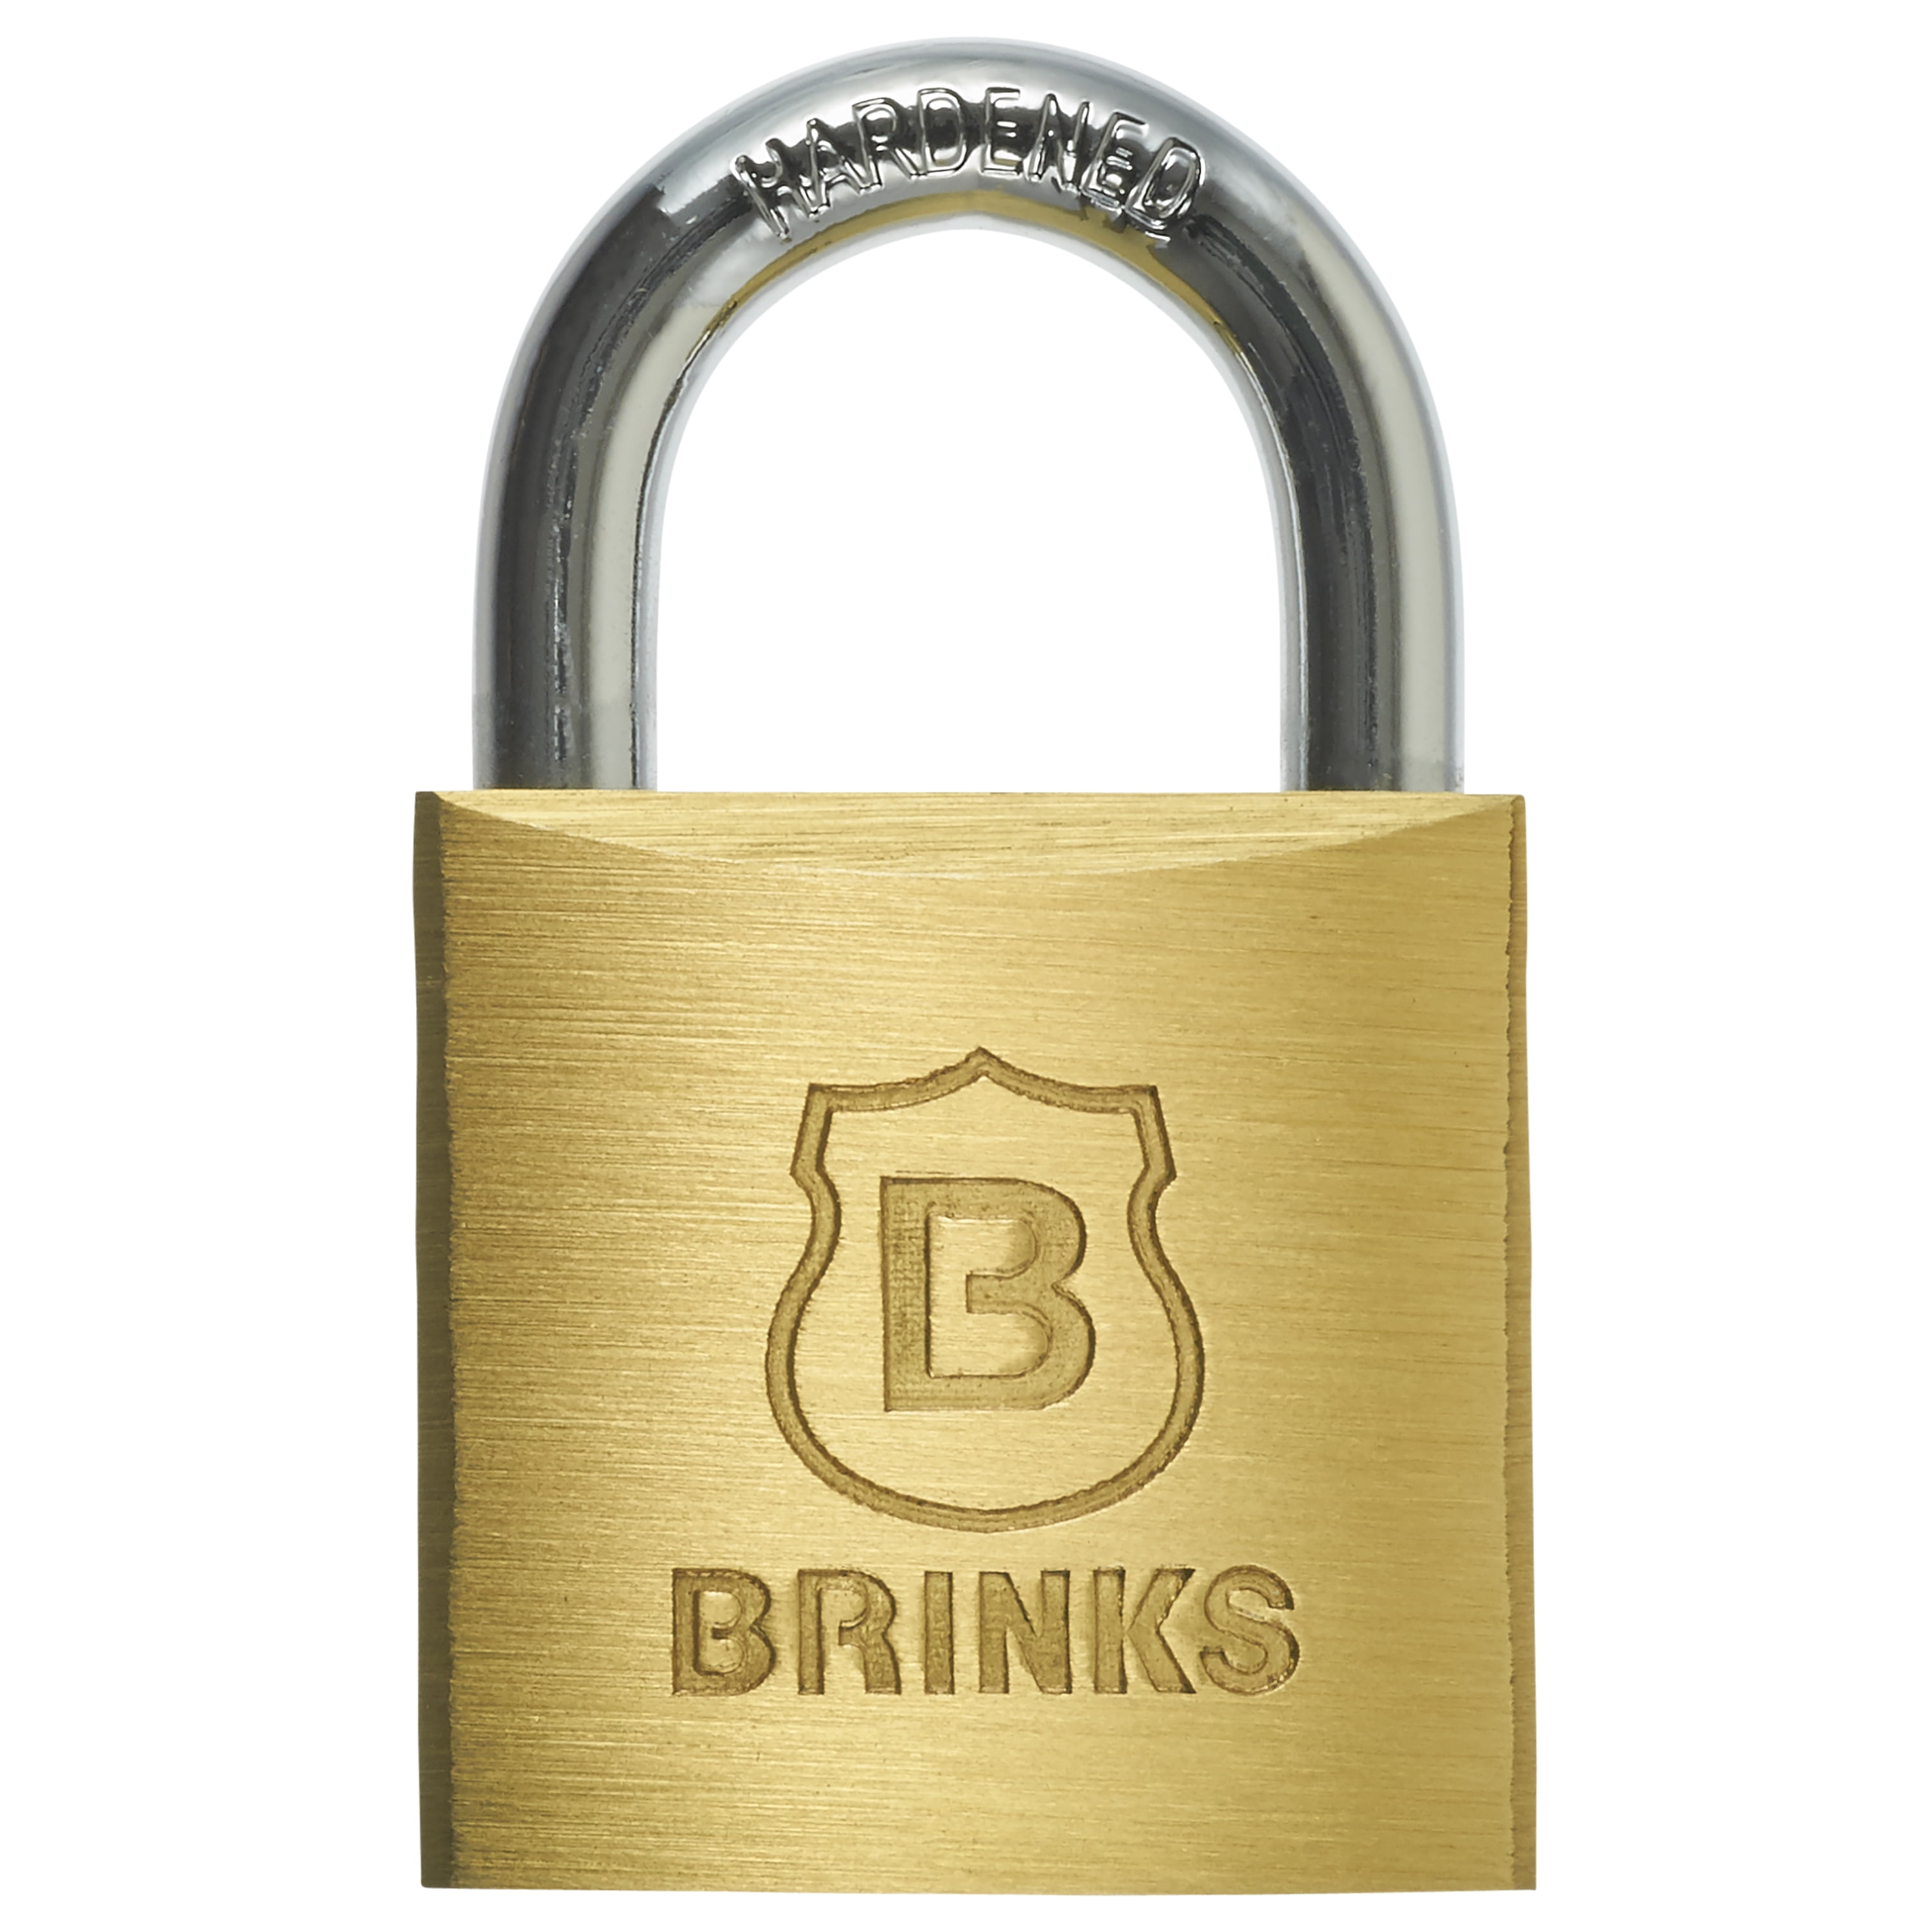 Brinks, Solid Brass 30mm Keyed Padlock with 5/8in Shackle 